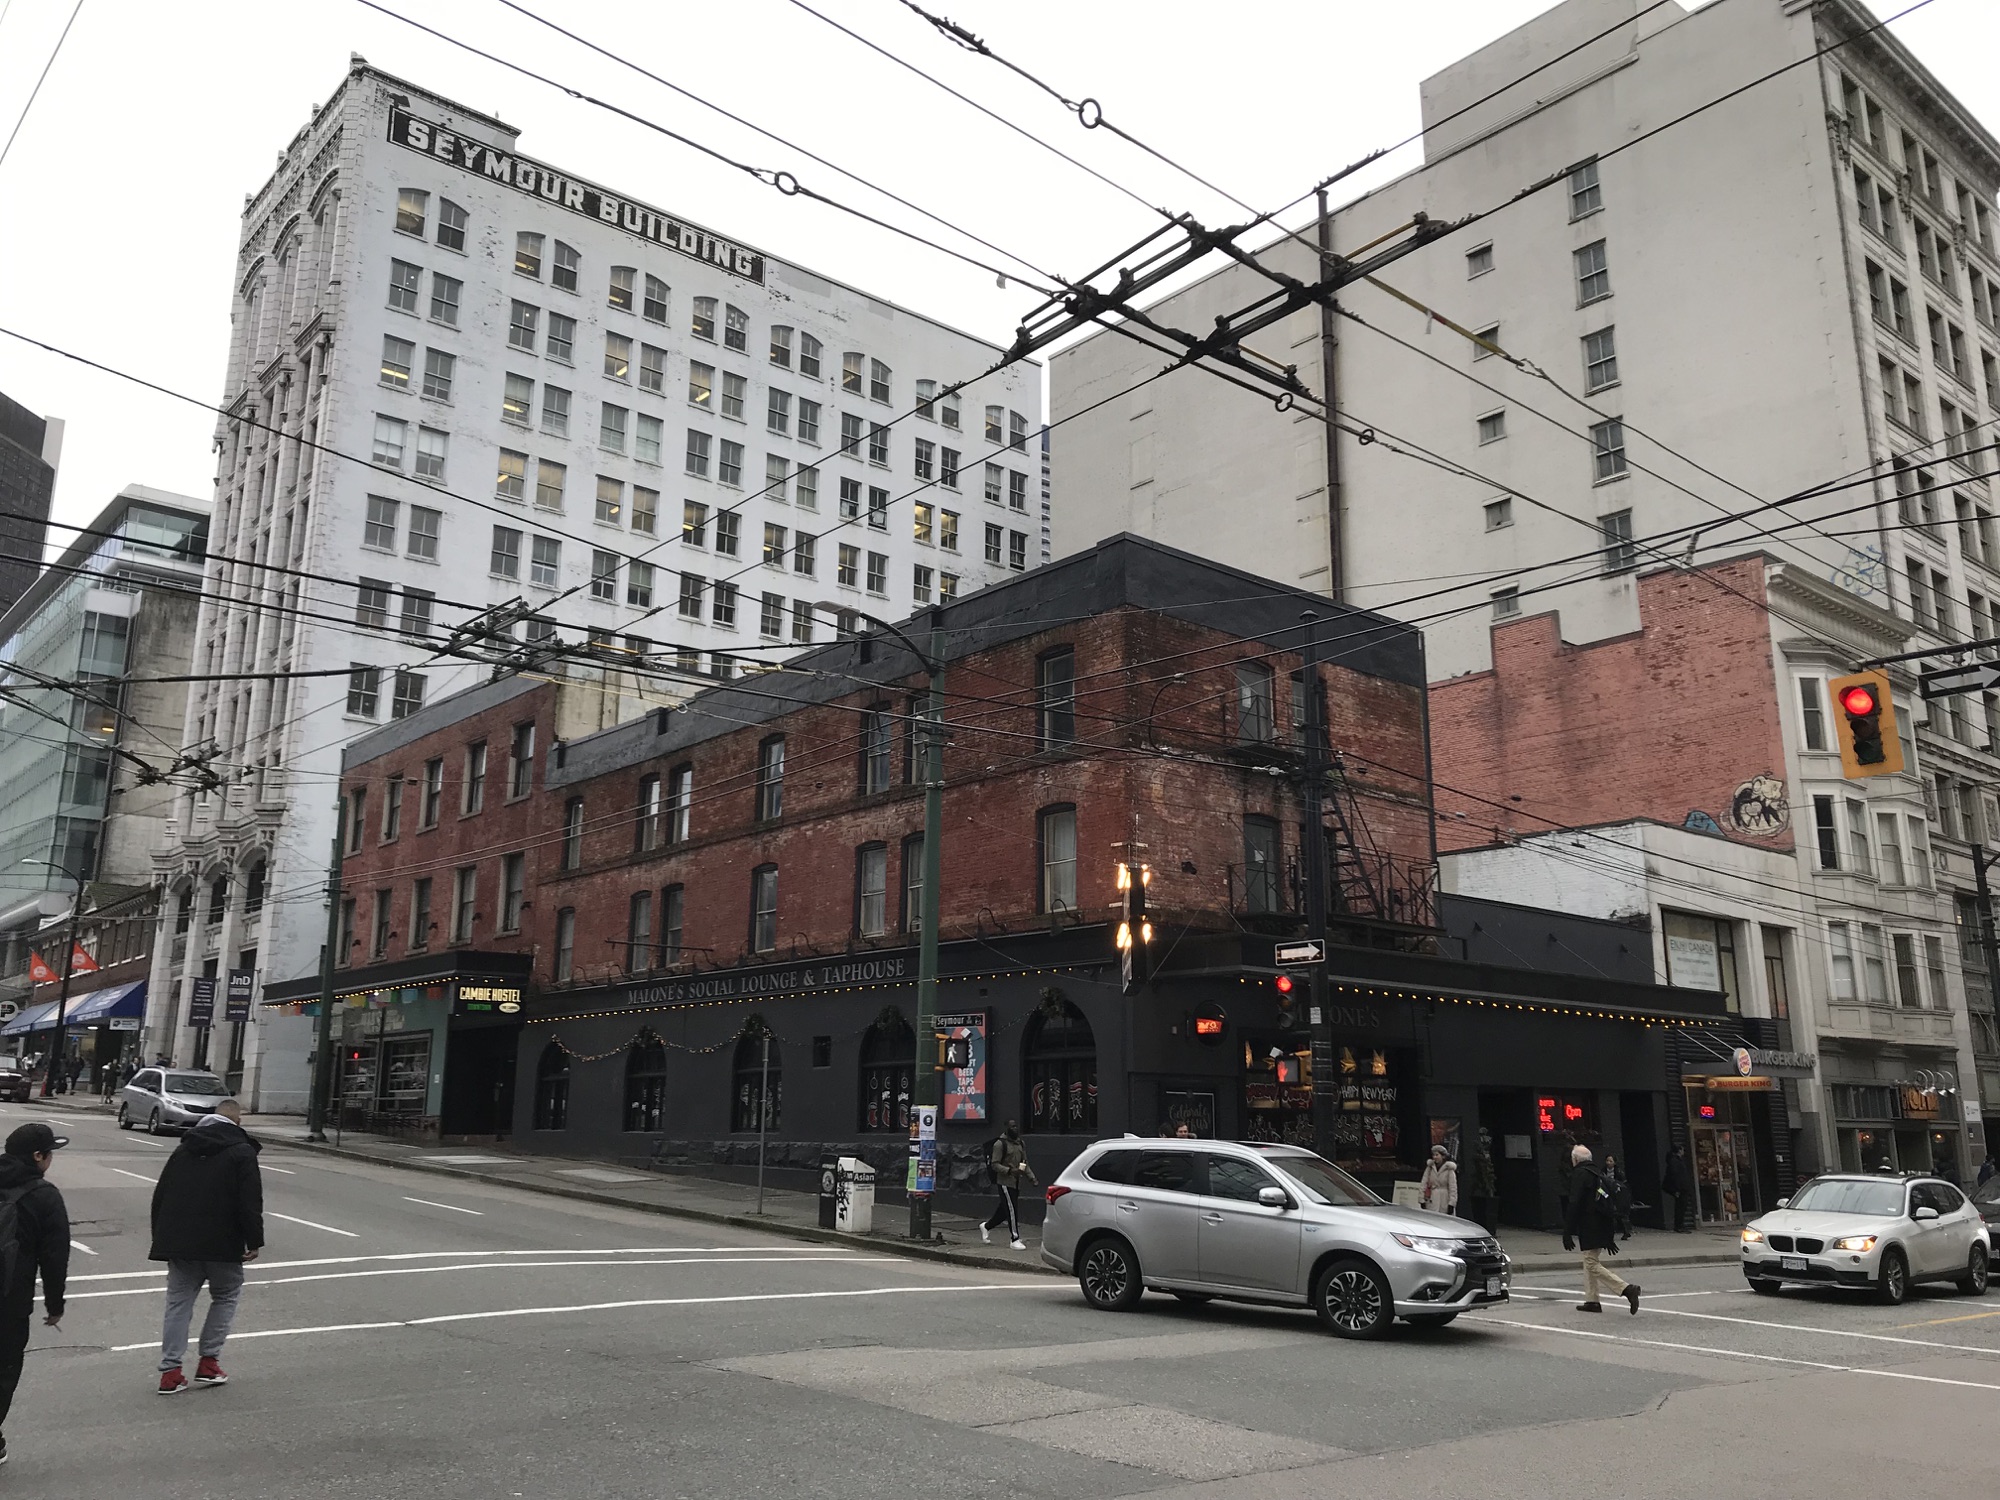 Some old buildings in Vancouver